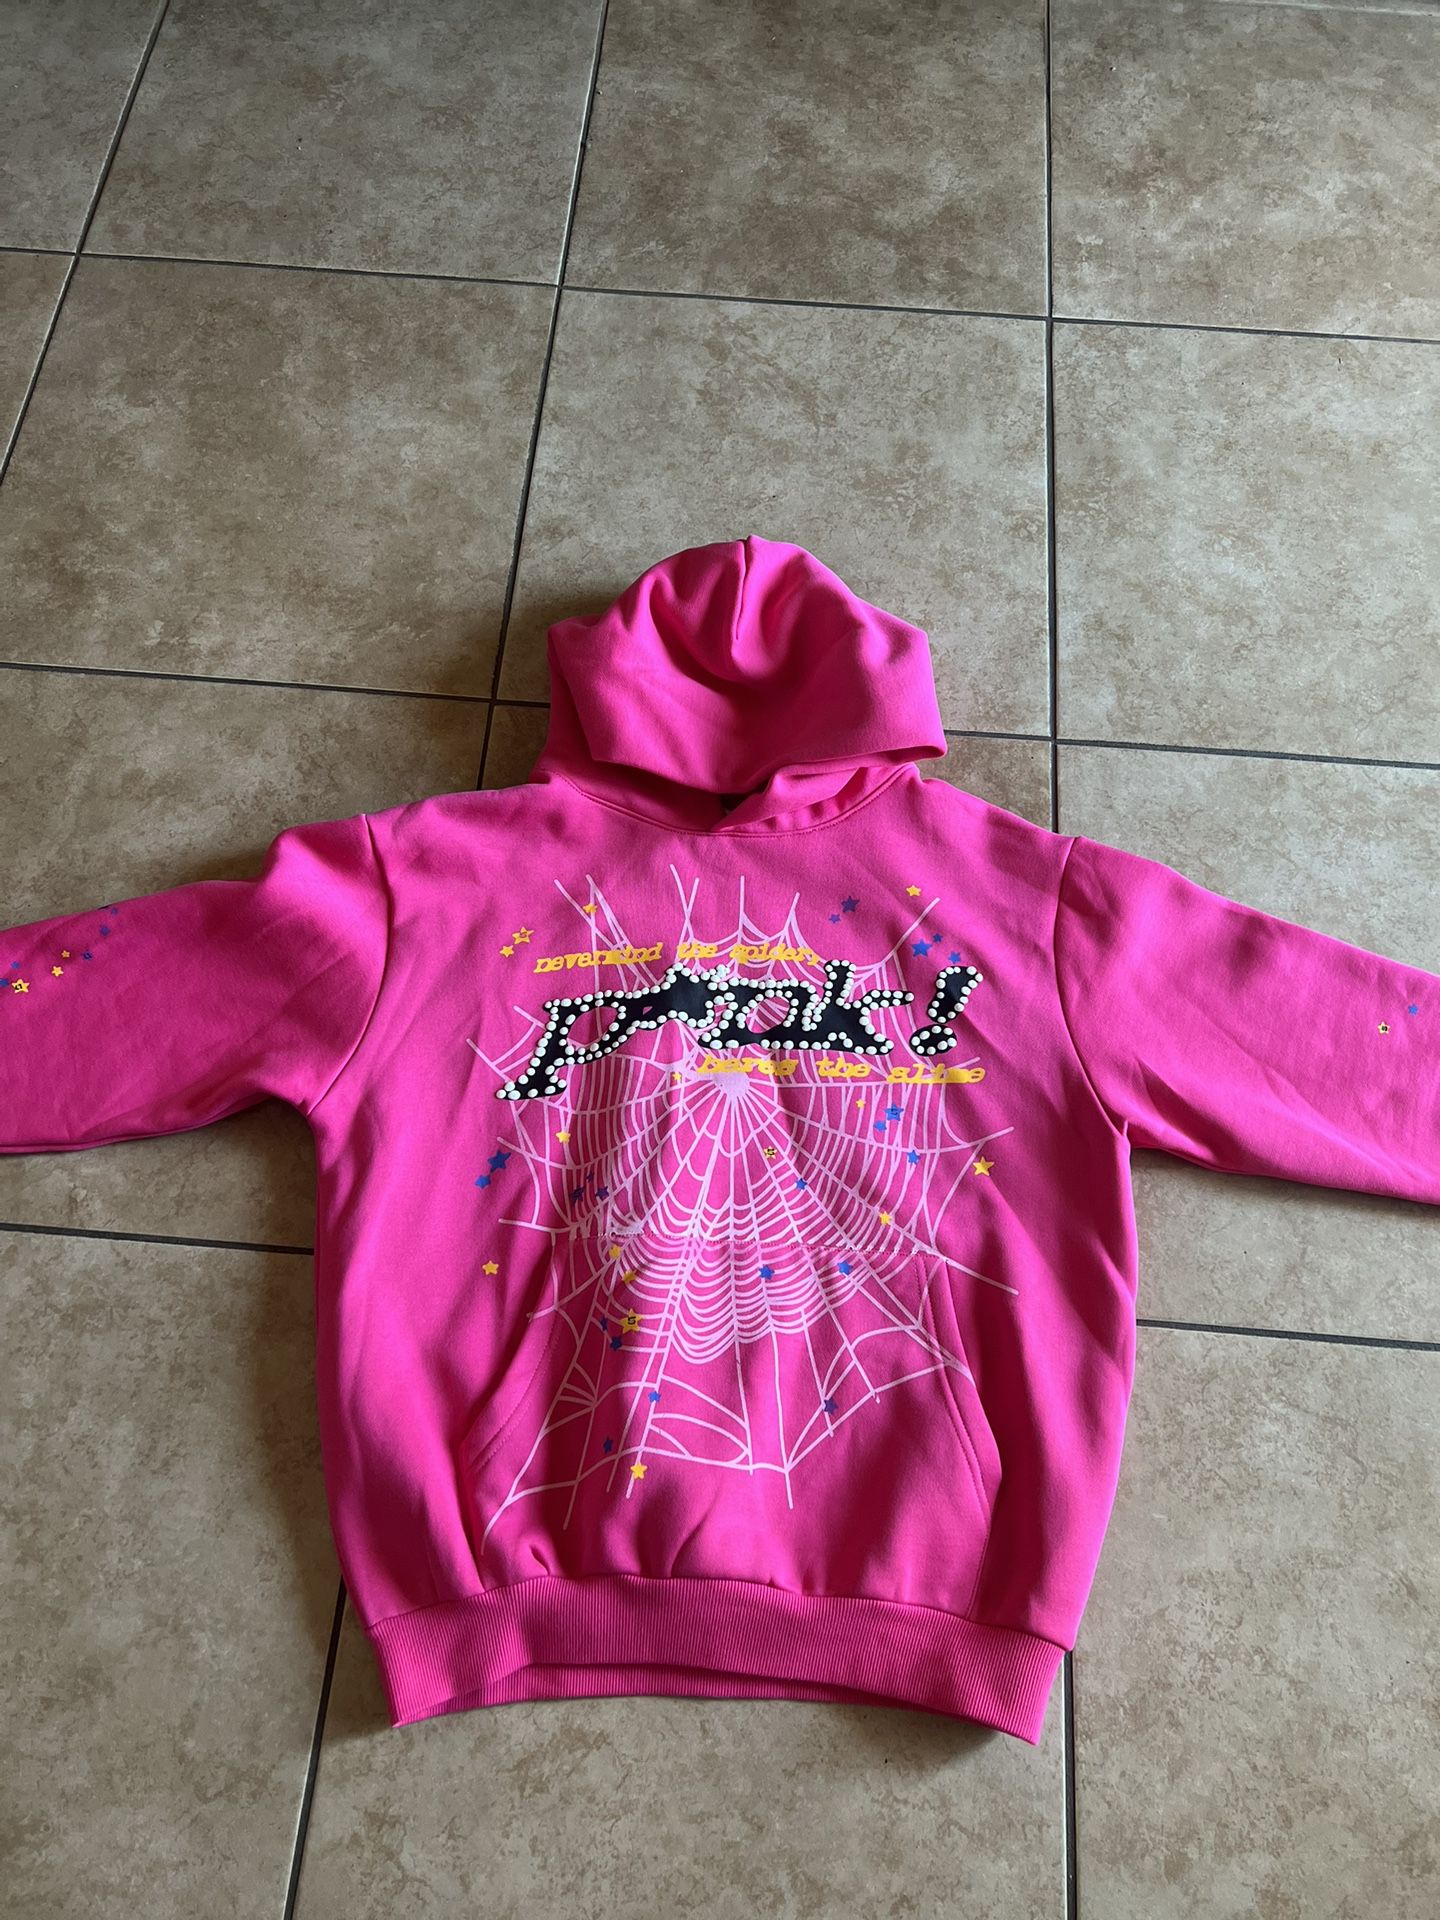 Sp5der Hoodie Pink Size Small